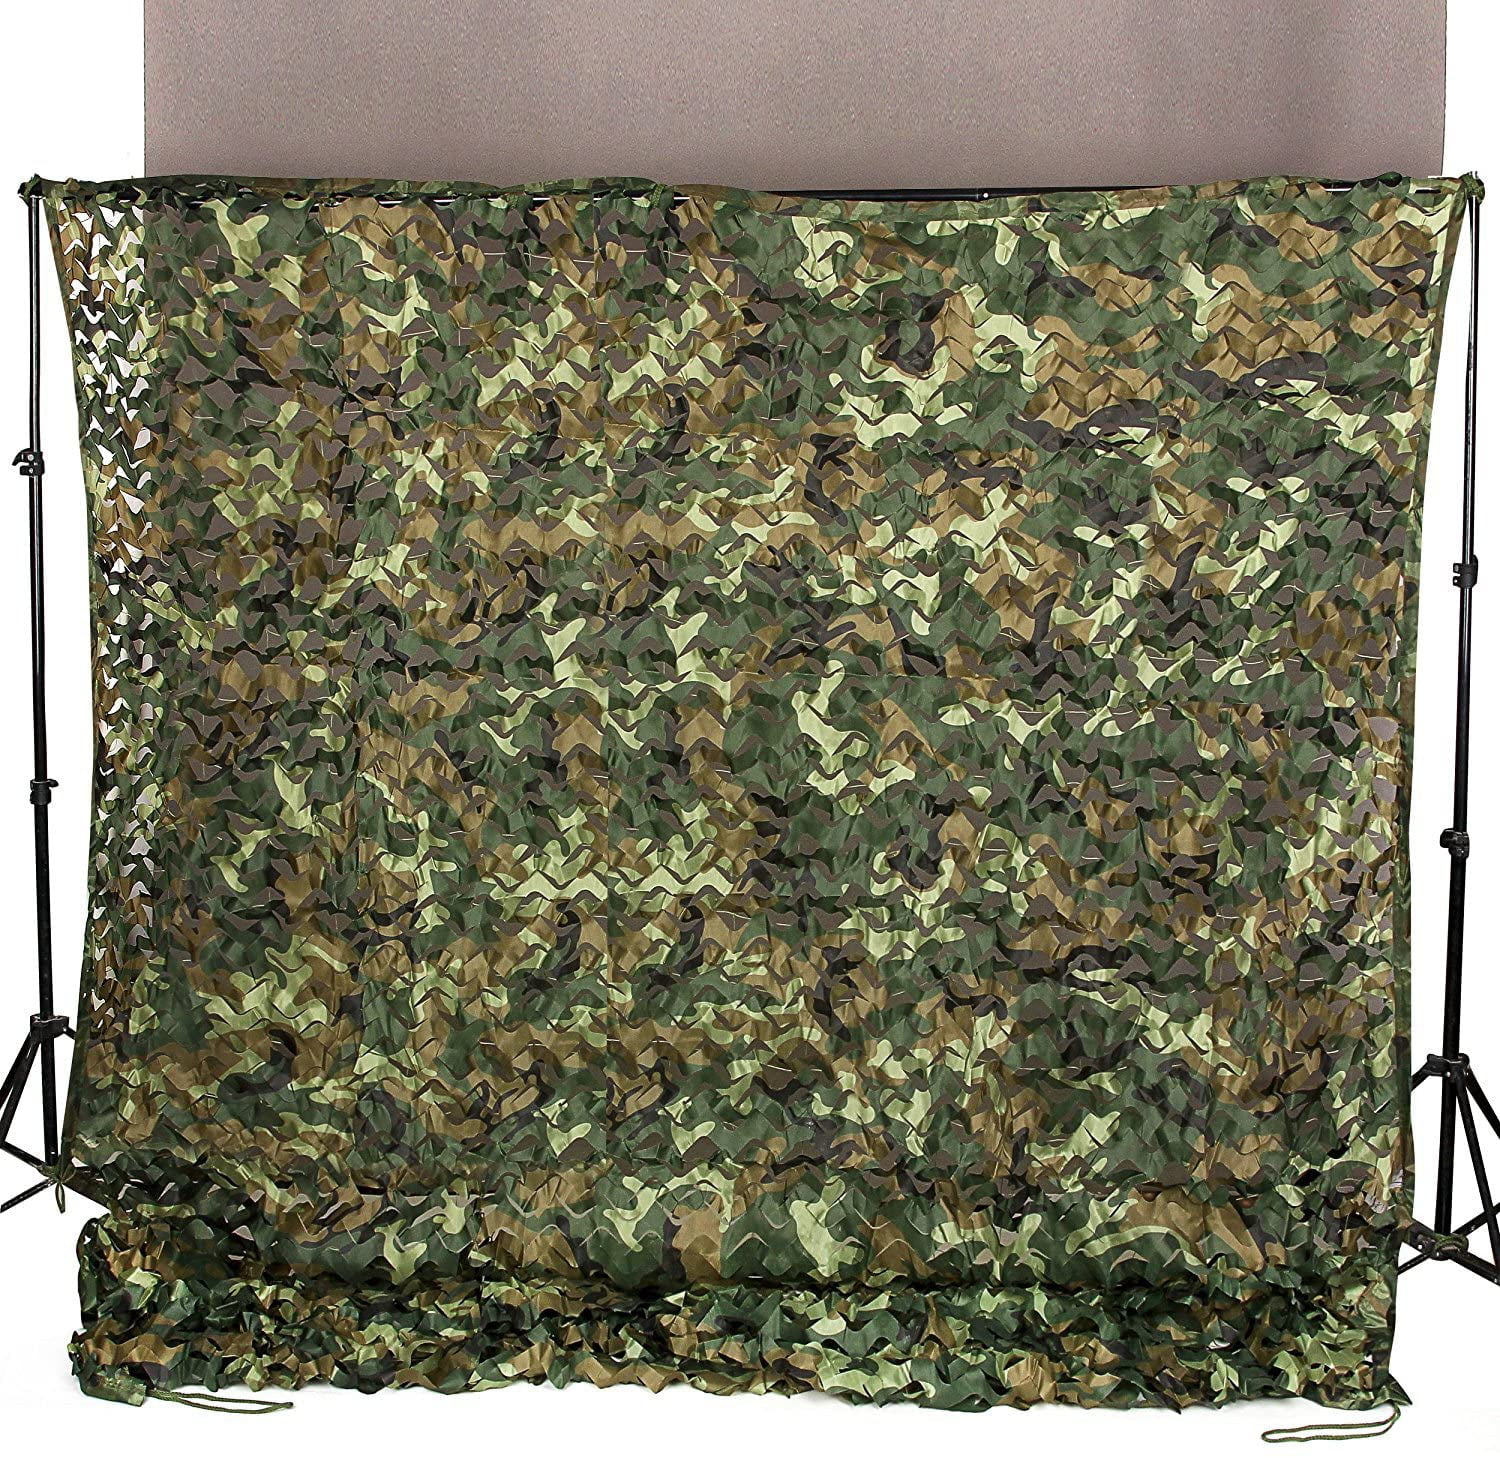 10ftx10ft Camouflage Netting Military Army Camo Hunting Shooting Hide Cover Net 